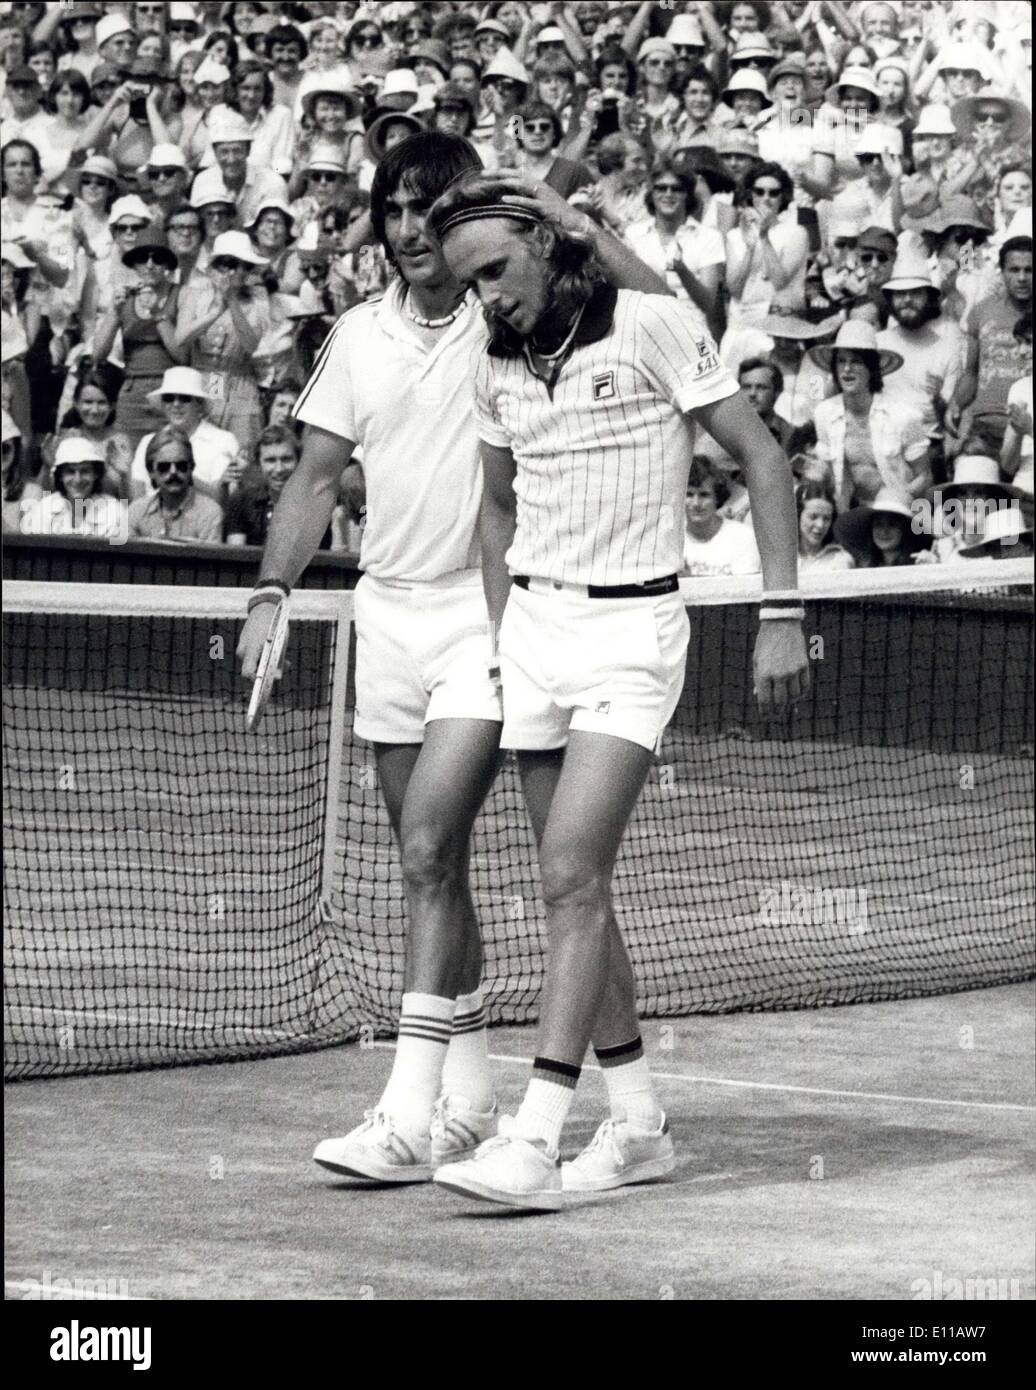 Jul. 03, 1976 - BJORN BORG OF SWEDEN IS THE 1976 WIMBLEDON SINGLES  CHAMPION. This afternoon on the centre court at Wimbledon BJORN BORG of  Sweden won the Men's Singles title when